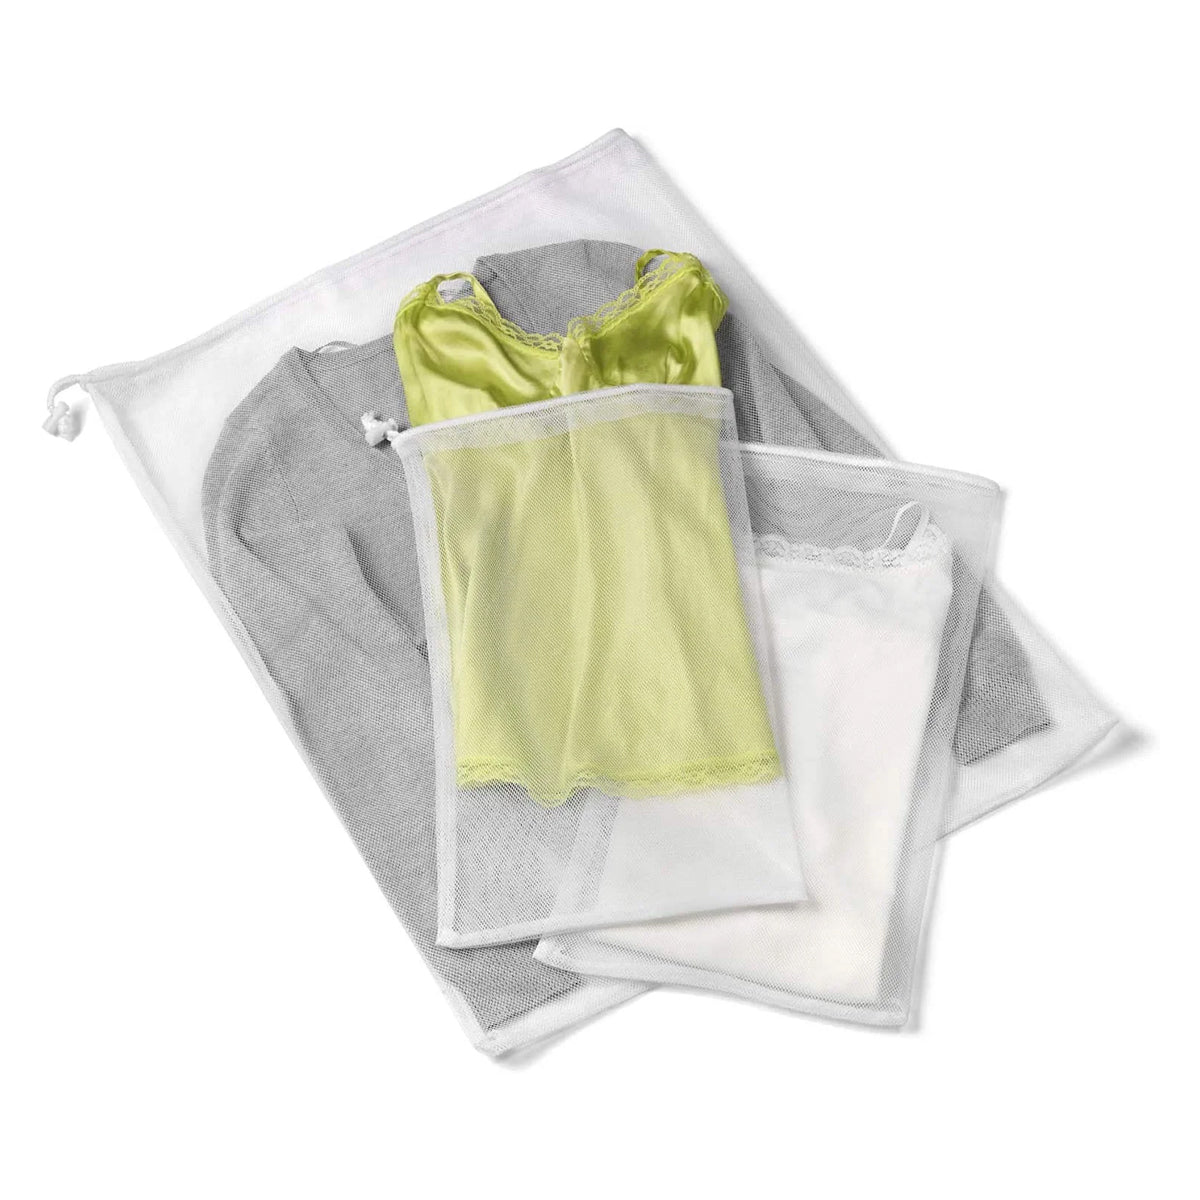 3pc Laundry Wash Bag – Protect Delicate Clothes In Washer & Dryer